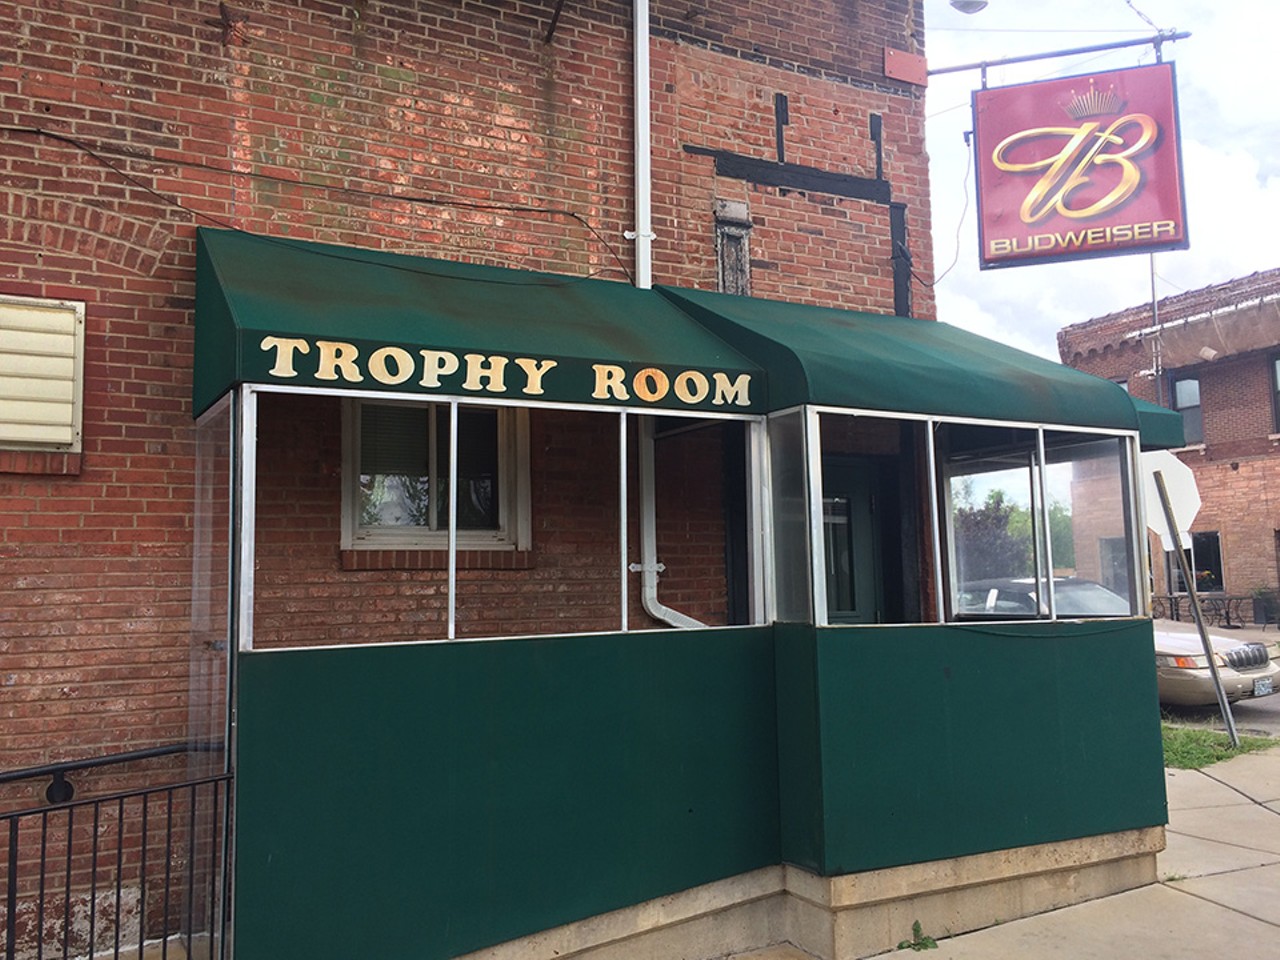 Trophy Room
Southwest Garden watering hole the Trophy Room (5099 Arsenal Street, 314-664-4810) is the stuff of legend, and no small part of its mythology is the fact that it&#146;s open for 21 hours nearly every day. The storefront bar starts serving suds at 6 a.m. and also offers a pool table and Keno and Golden Tee and everything else that makes a dive bar great. Best of all, it&#146;s a judgment-free zone: Whether you&#146;re a third-shifter looking to unwind after a hard night&#146;s work or just a dedicated alcoholic getting started early, the Trophy Room&#146;s colorful regulars are more than happy to raise a pint with you. The Trophy Room is open Monday through Saturday from 6 a.m. to 3 a.m. and Sunday from 11 a.m. to 3 a.m.
Photo courtesy of Daniel Hill